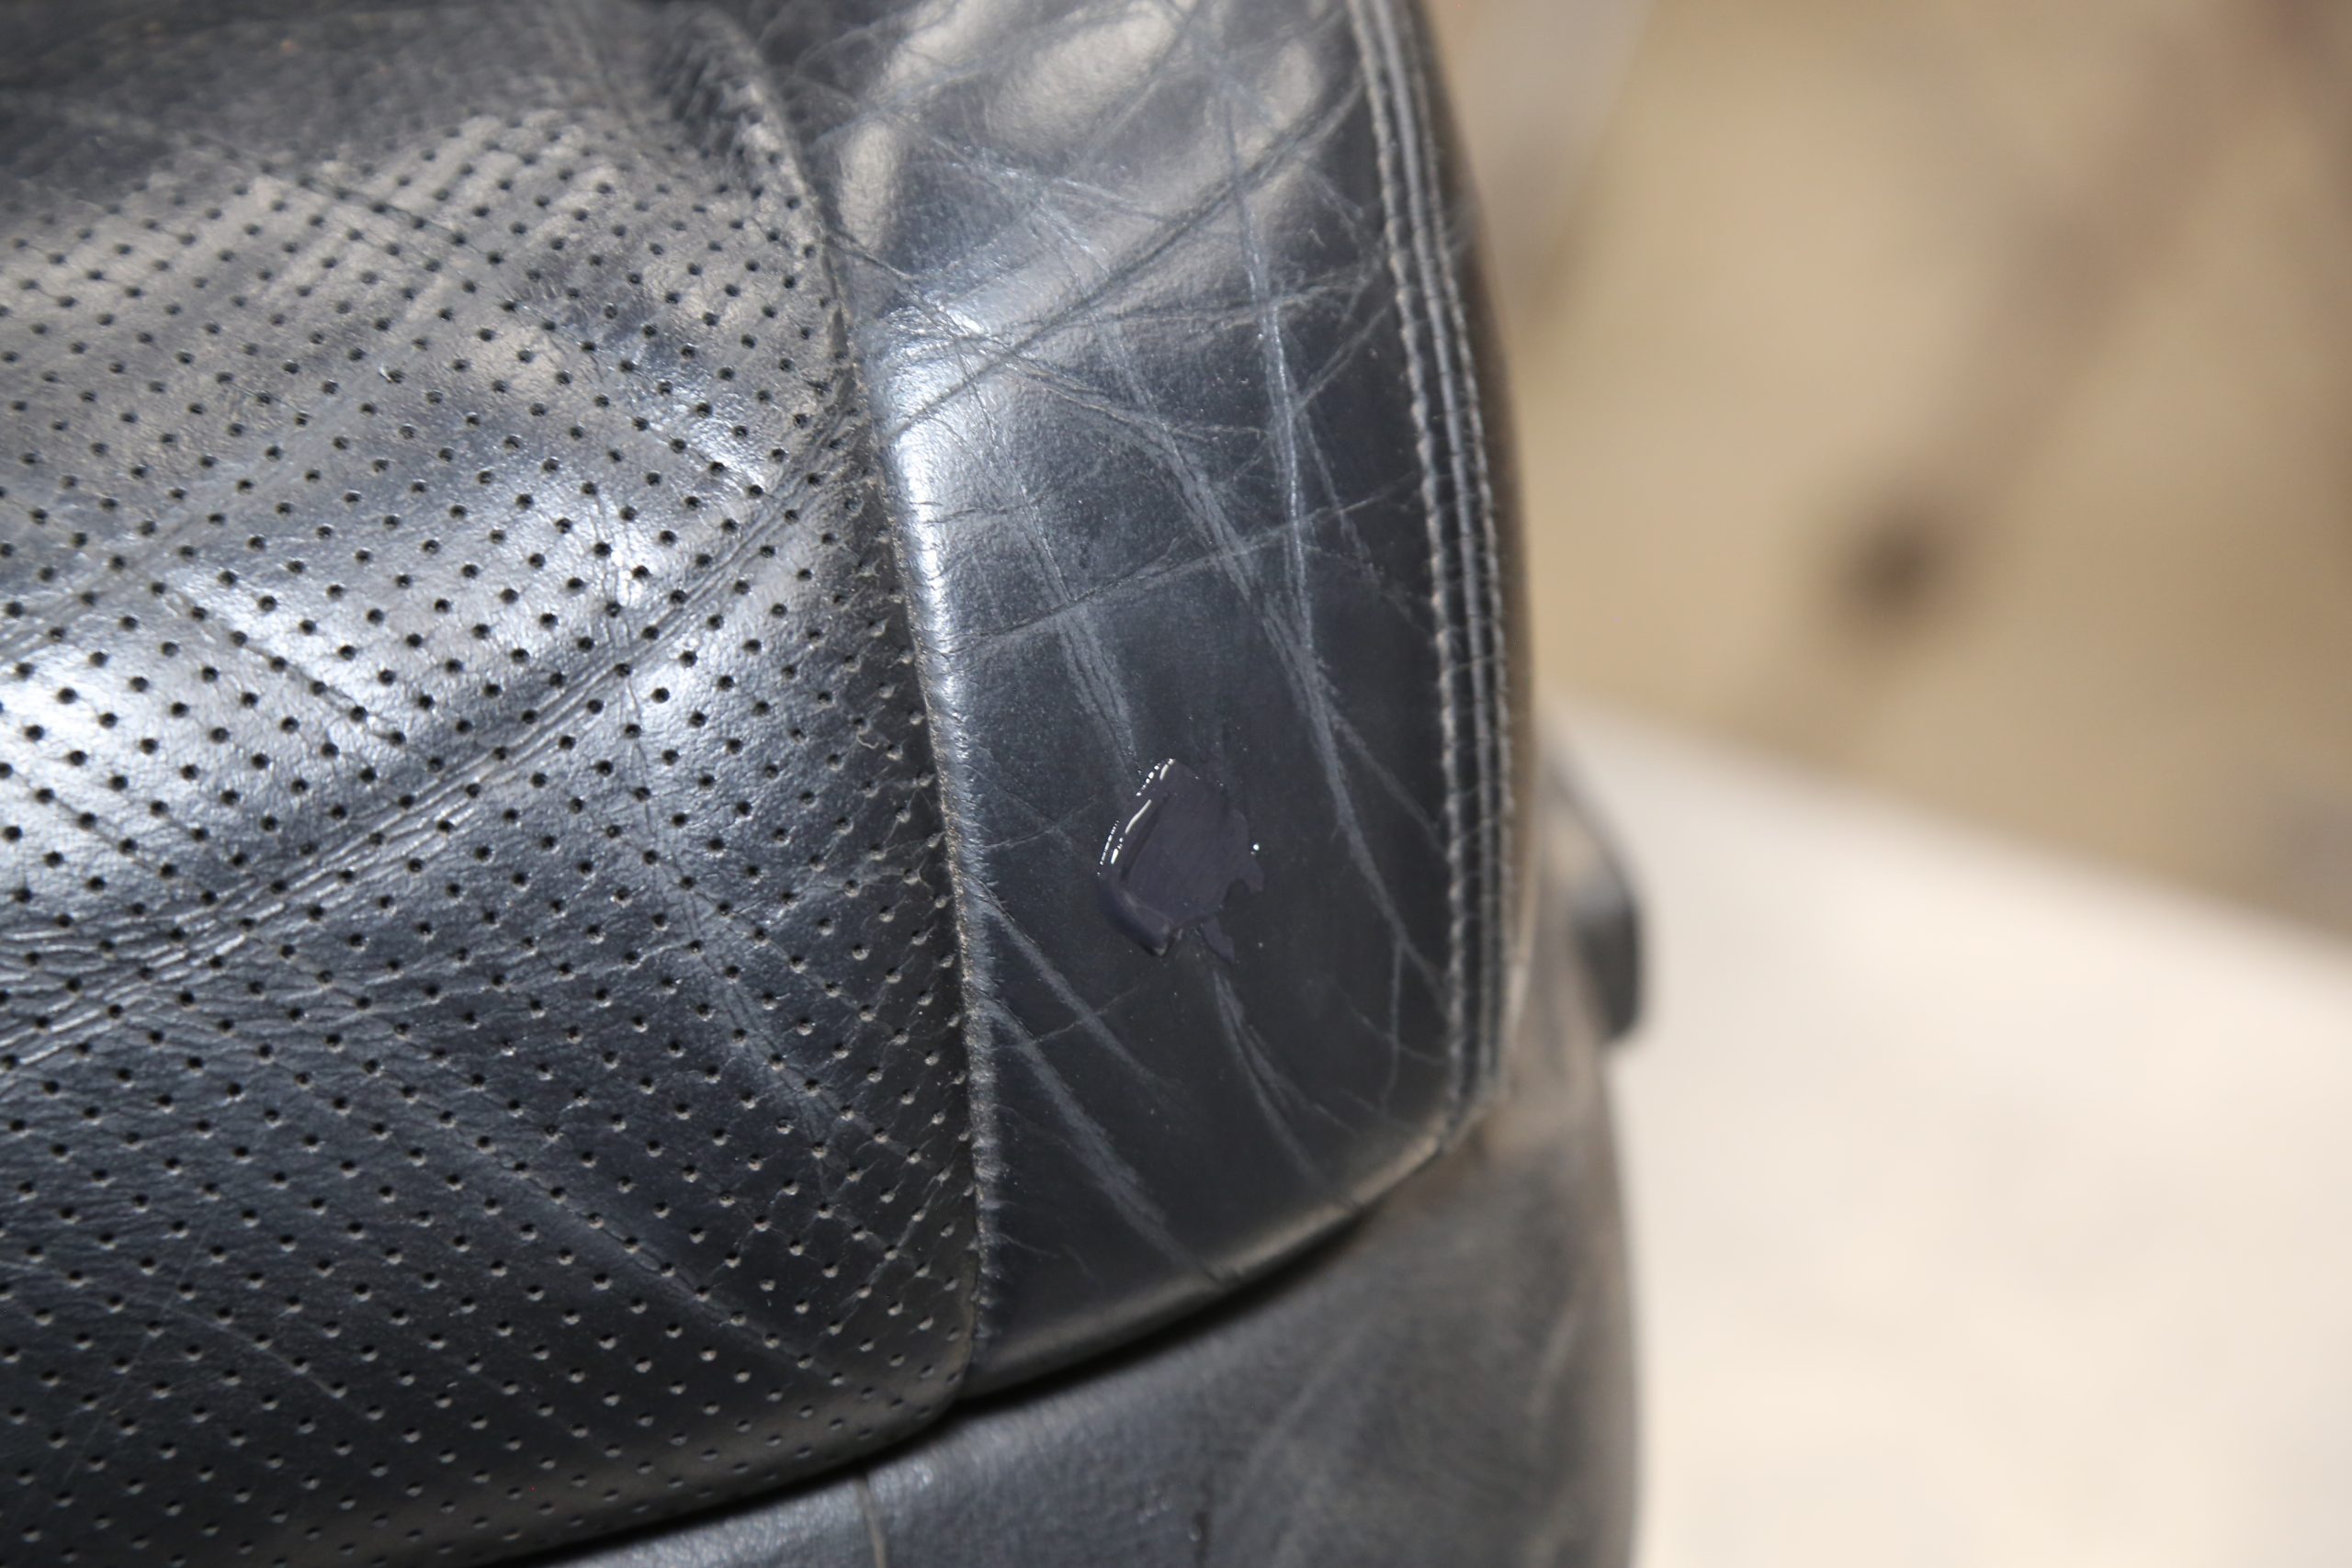 Tear in vinyl part of leather seat - Anyway to know what that *should* do  to Guaranteed Trade In value?